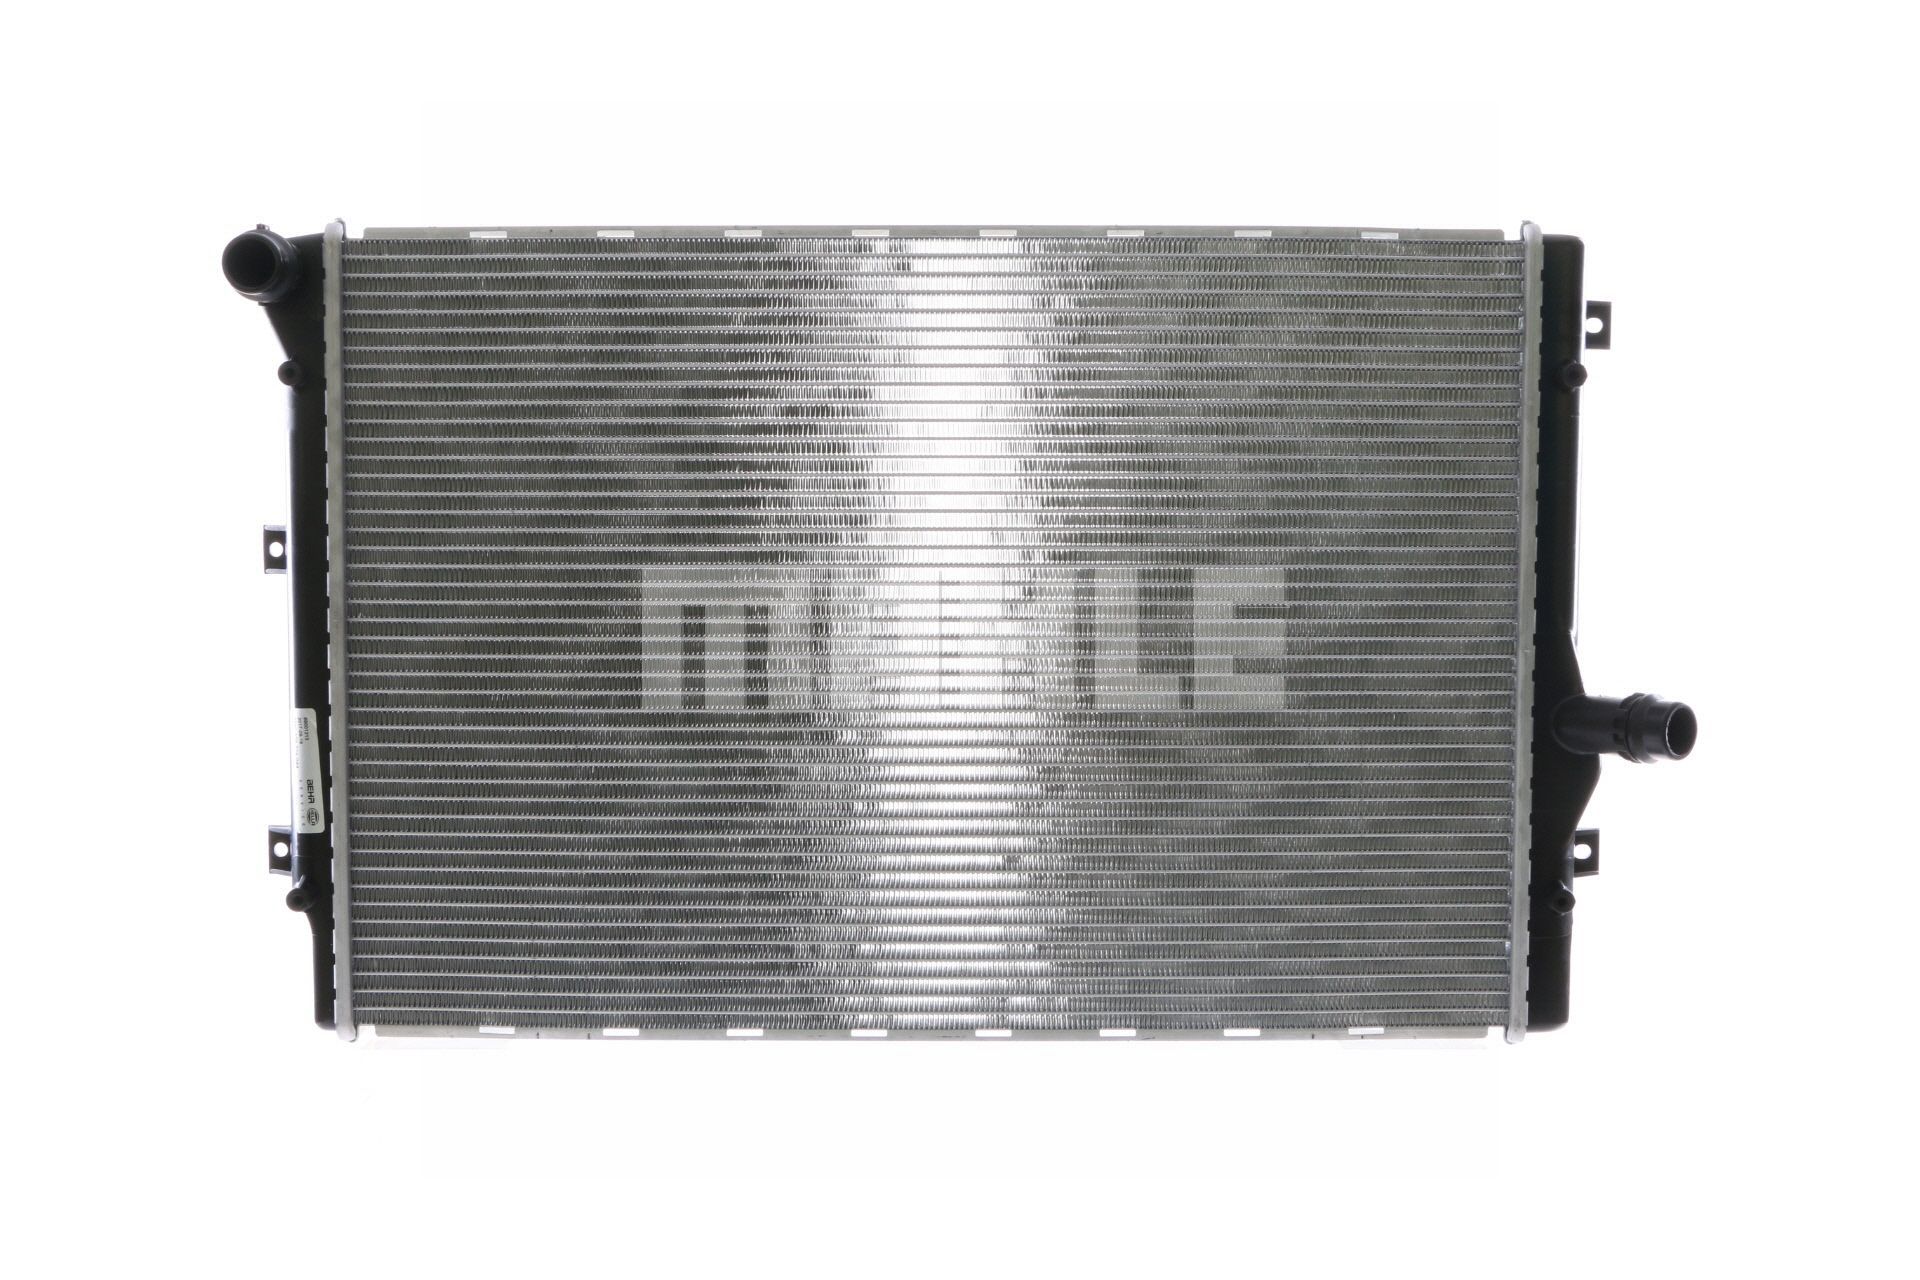 Engine radiator MAHLE ORIGINAL for vehicles with/without air conditioning, 648 x 438 x 32 mm, Brazed cooling fins - CR 1539 001S